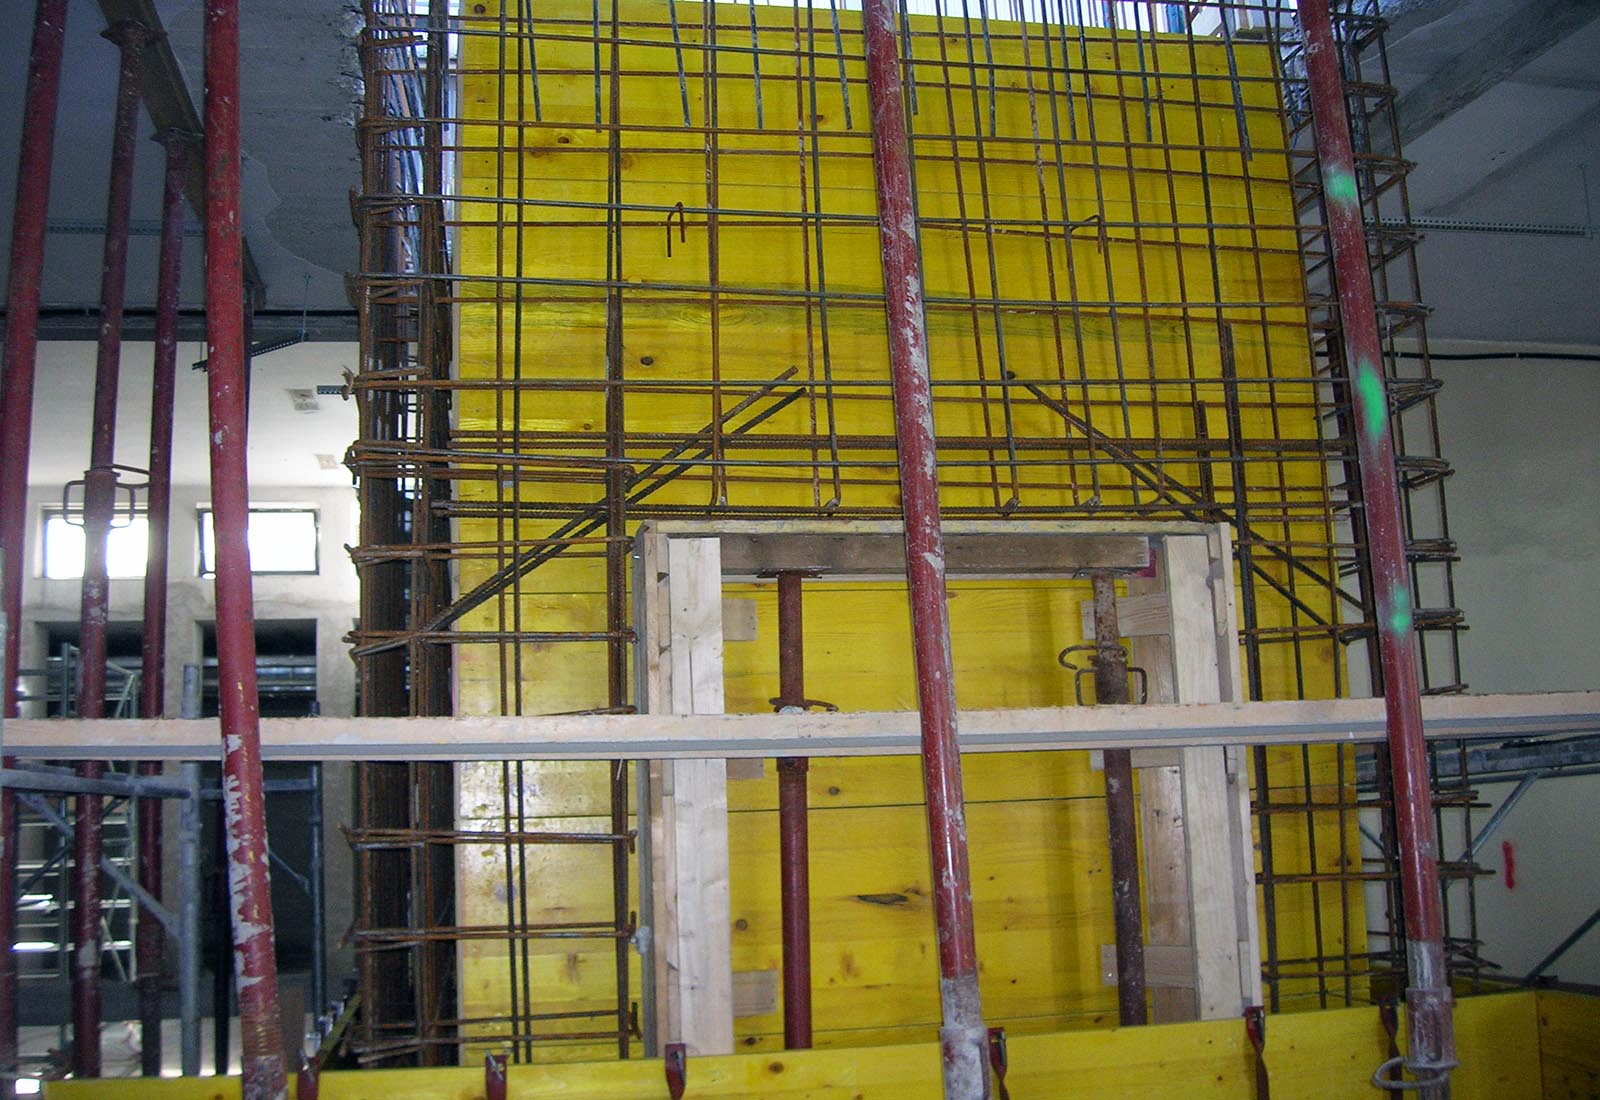 Manzoni school center in Milan - The structure of the new lift